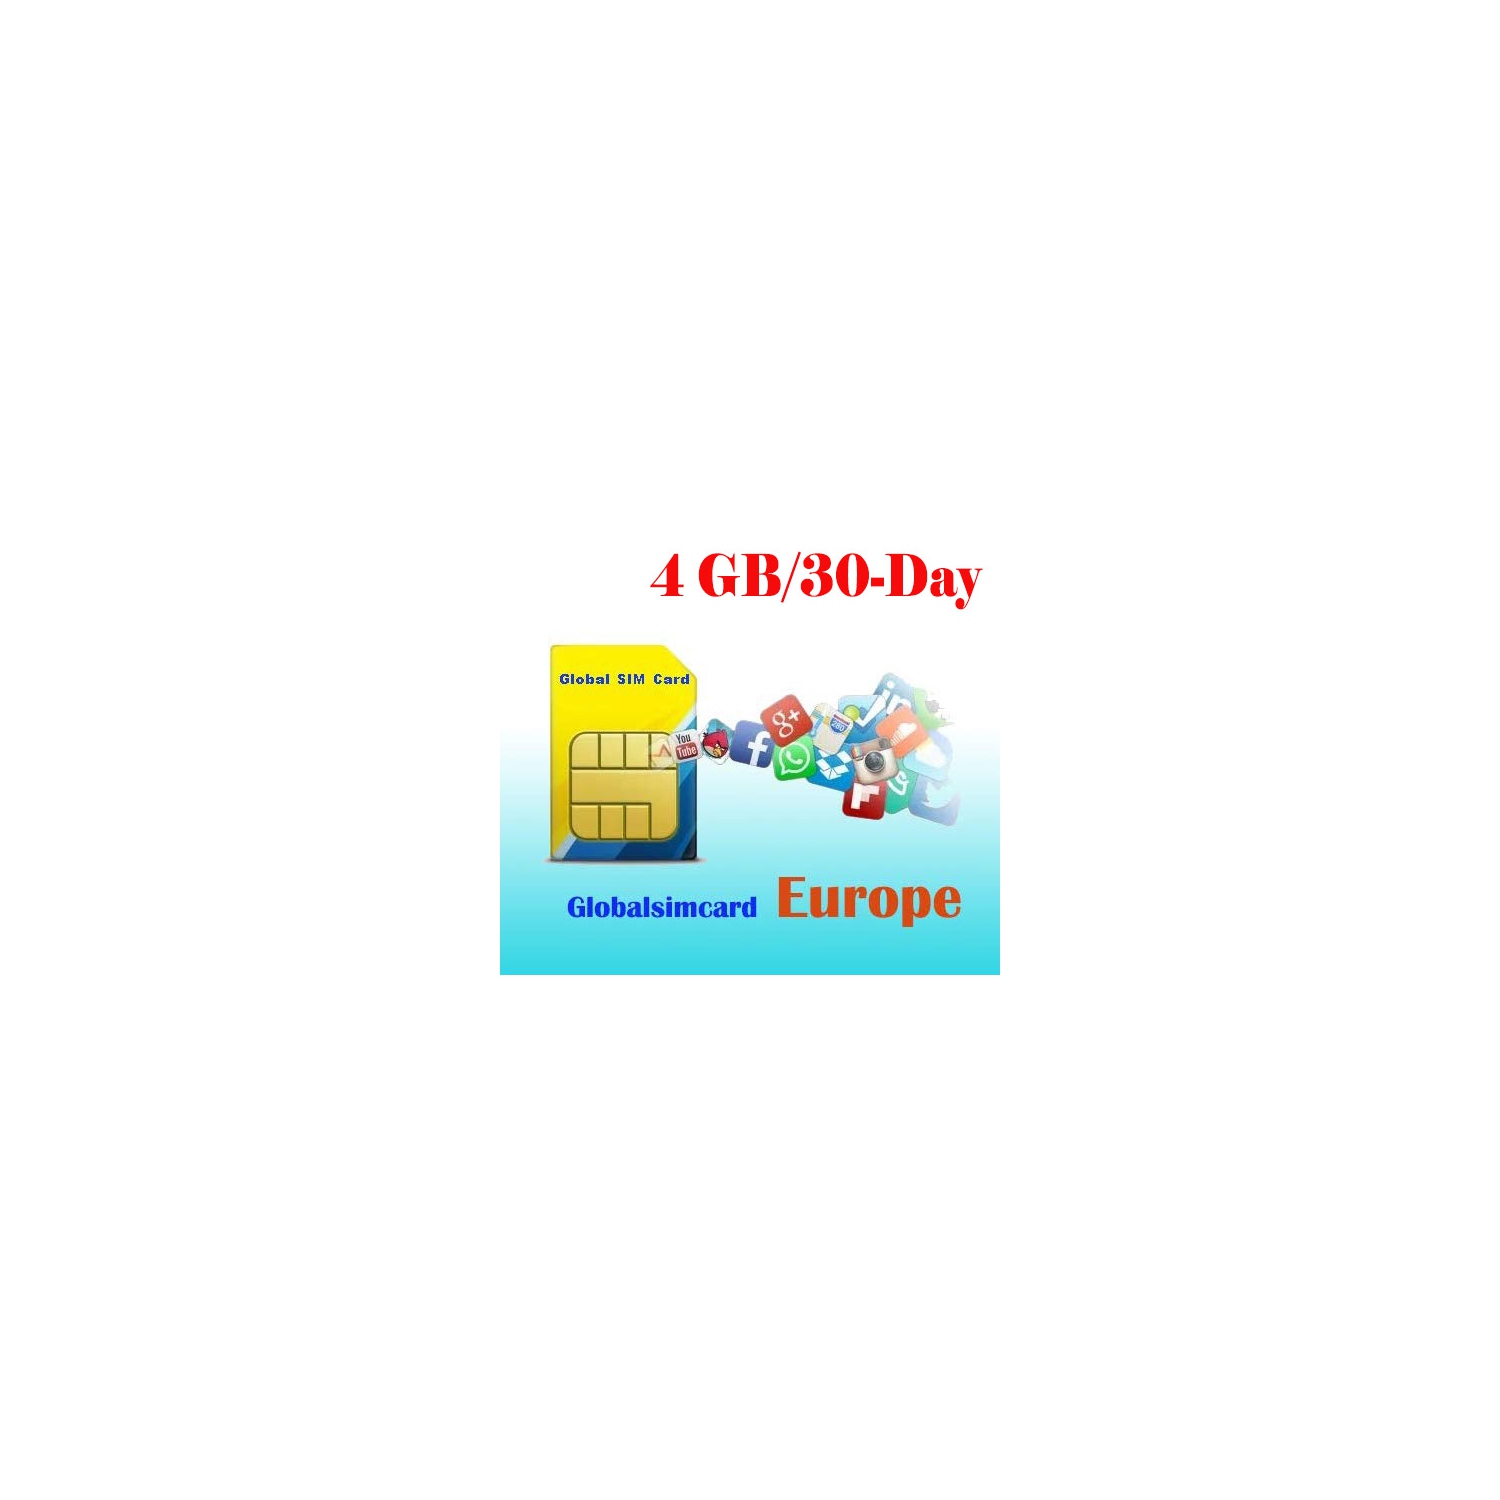 EUROPE 37 COUNTRIES Prepaid DATA Roaming SIM Card 30 Days Unlimited Data（4GB at 4G/LTE High Speed) Data Only